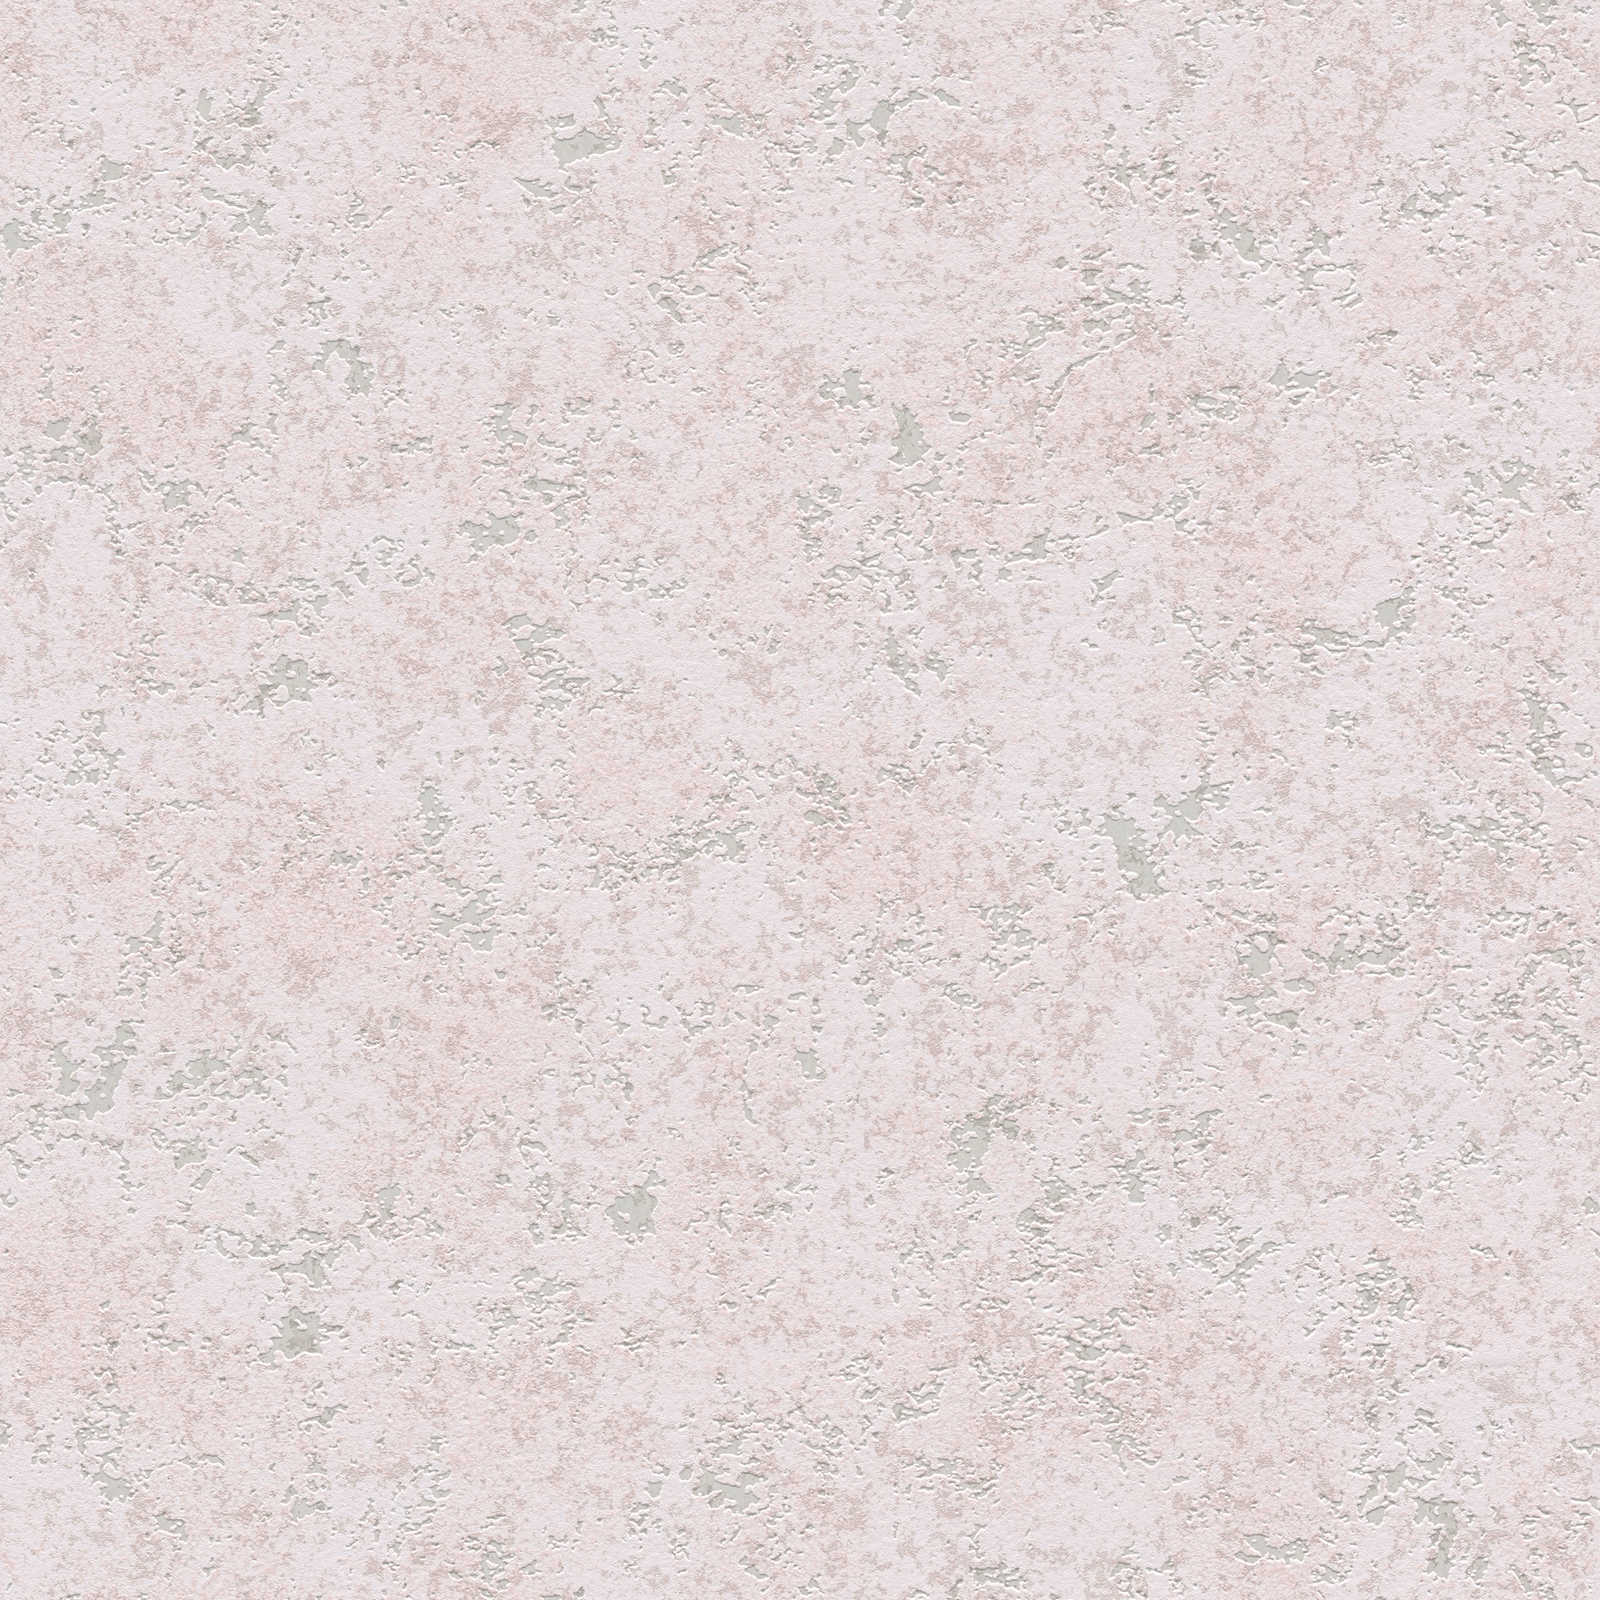 Non-woven wallpaper with textured pattern in plaster look - pink
